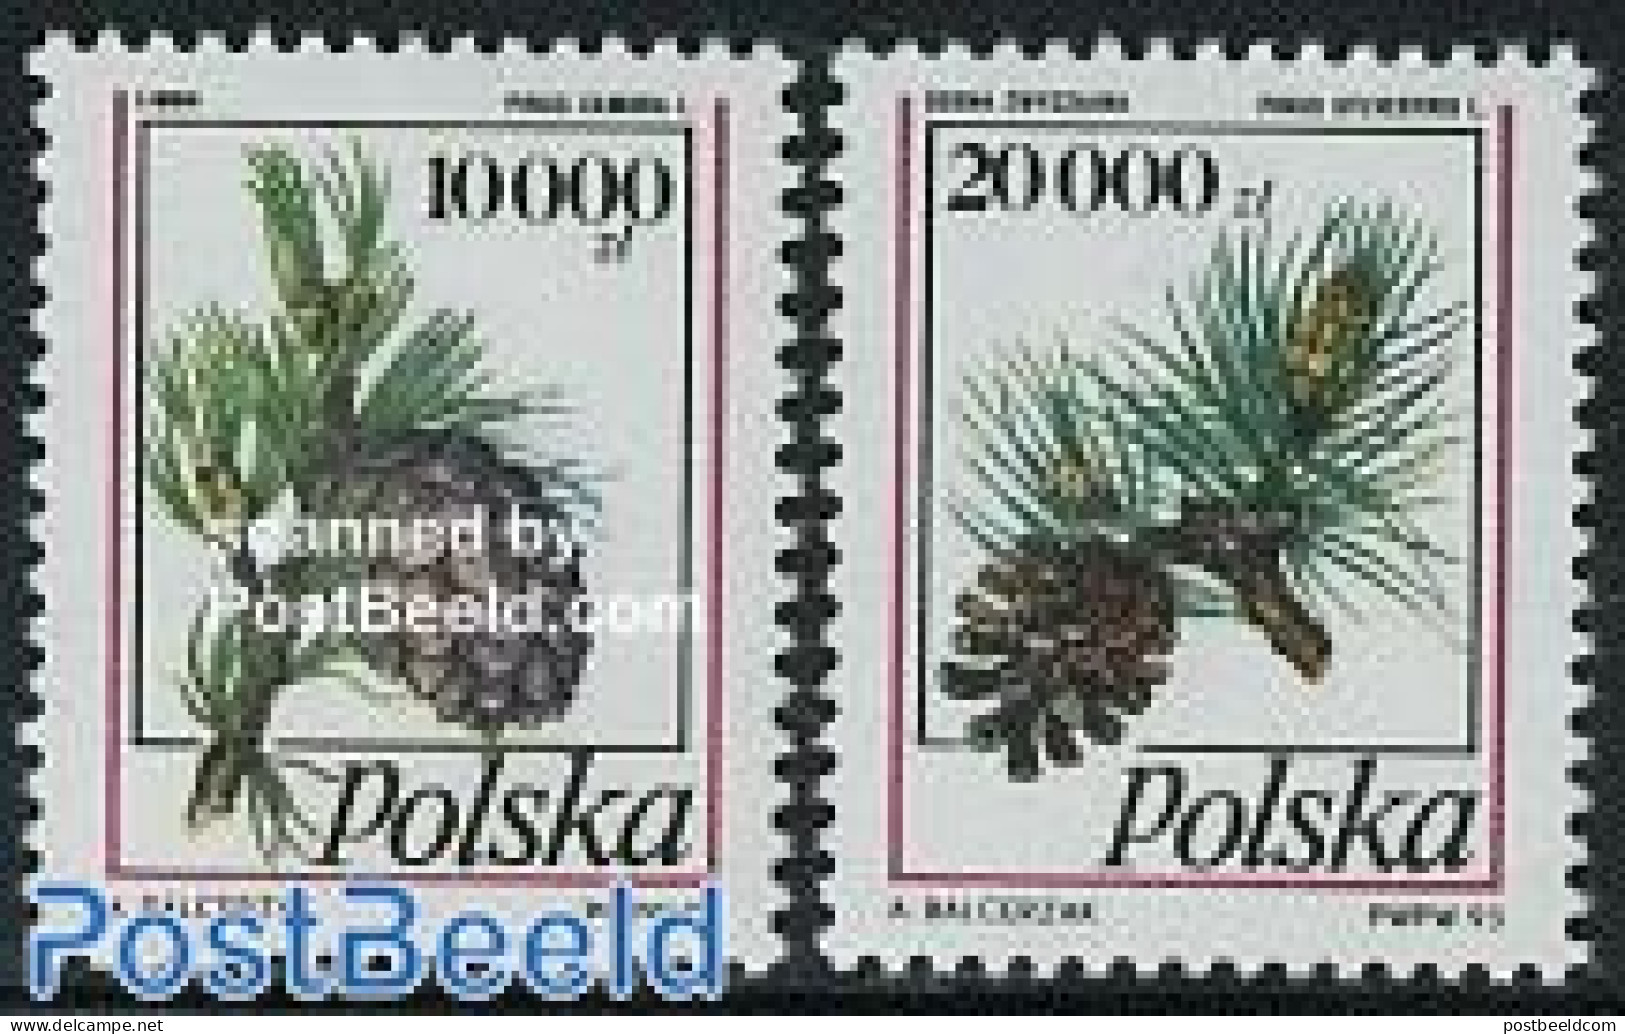 Poland 1993 Definitives, Trees 2v, Mint NH, Nature - Trees & Forests - Ongebruikt